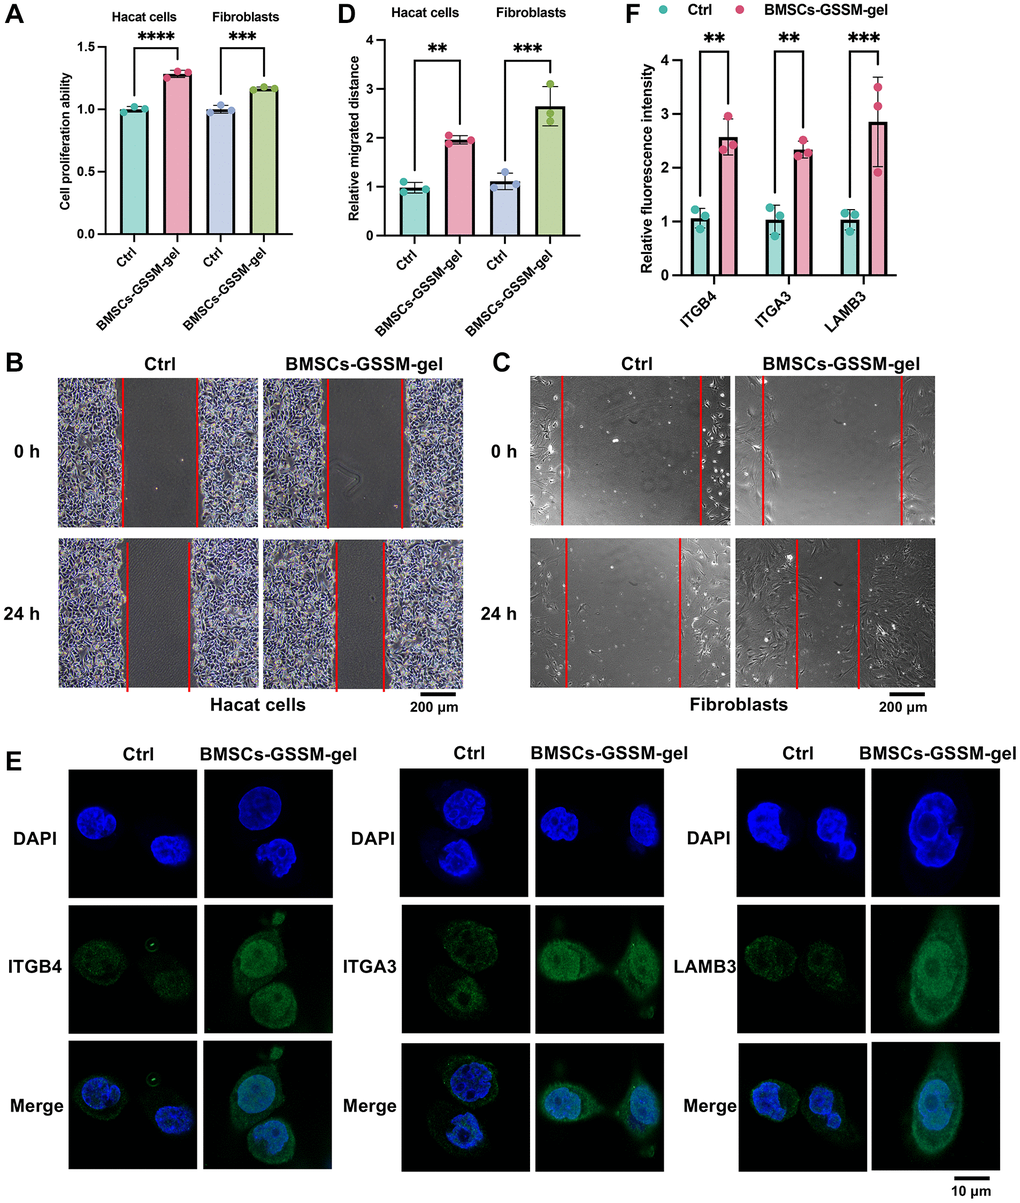 BMSCs-GSSM-gel promoted cell proliferation and migration of Hacat cells and fibroblasts. (A–D) The influence of BMSCs-GSSM-gel on cell proliferation and migration of Hacat cells and fibroblasts was investigated. (E, F) The expression of ITGB4, ITGA3, and LAMB3 in Hacat cells was measured with immunofluorescence cell staining. **p ***p 